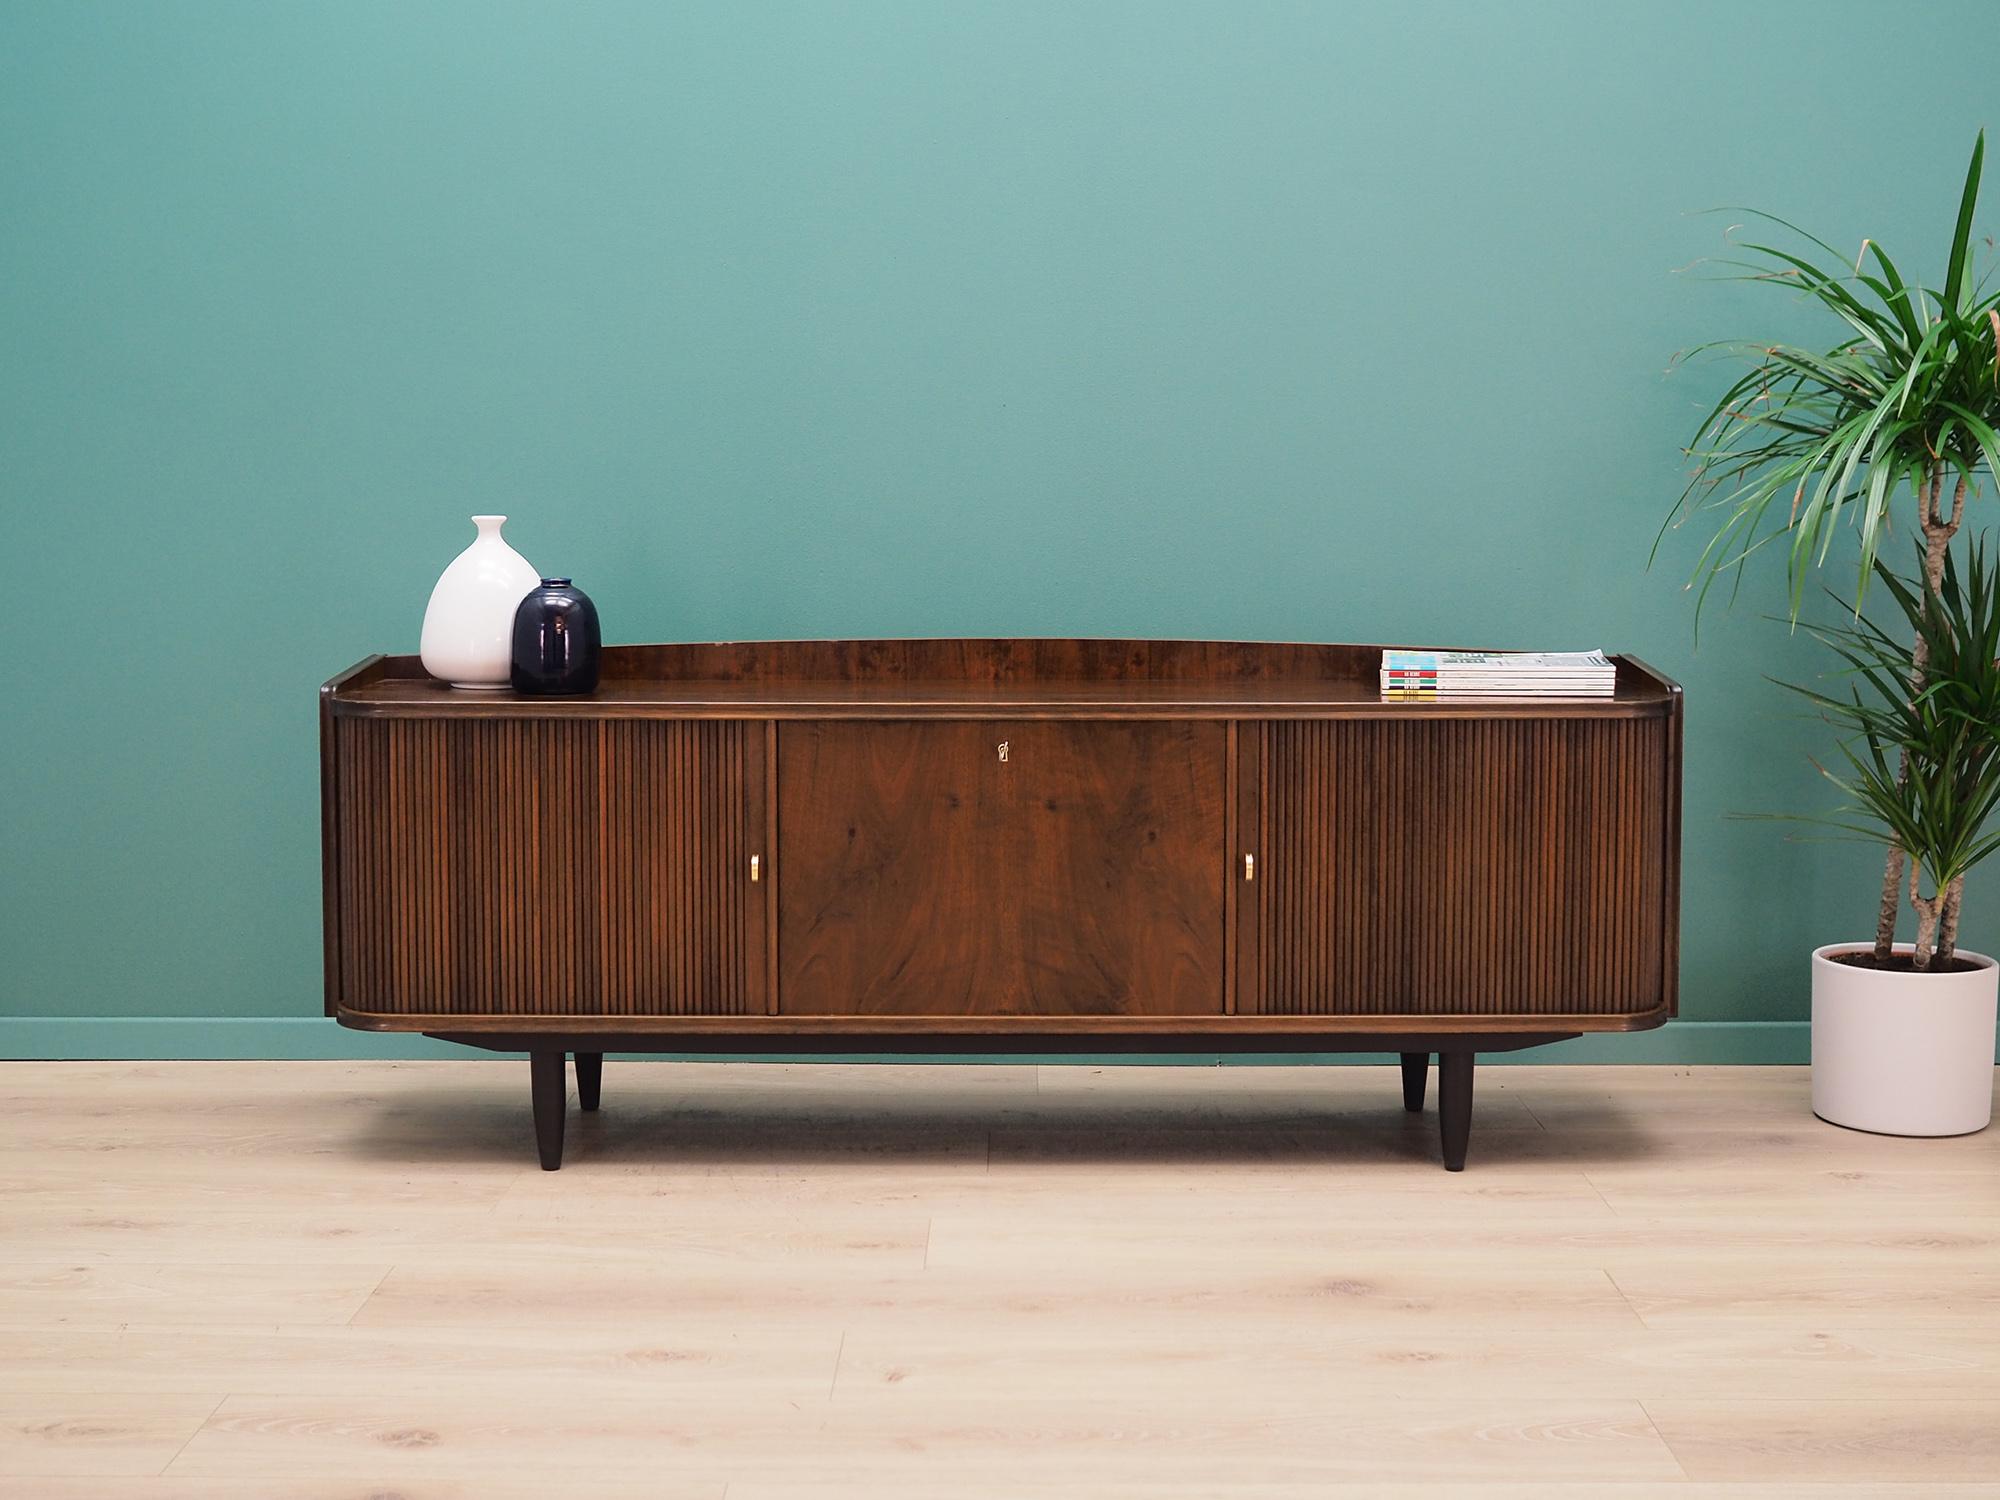 Outstanding sideboard from 1960s-1970s. Scandinavian design, Minimalist form. Surface of the furniture is covered with walnut veneer, legs are made of solid walnut wood. Sideboard has two drawers behind stylish doors, in the middle there is an